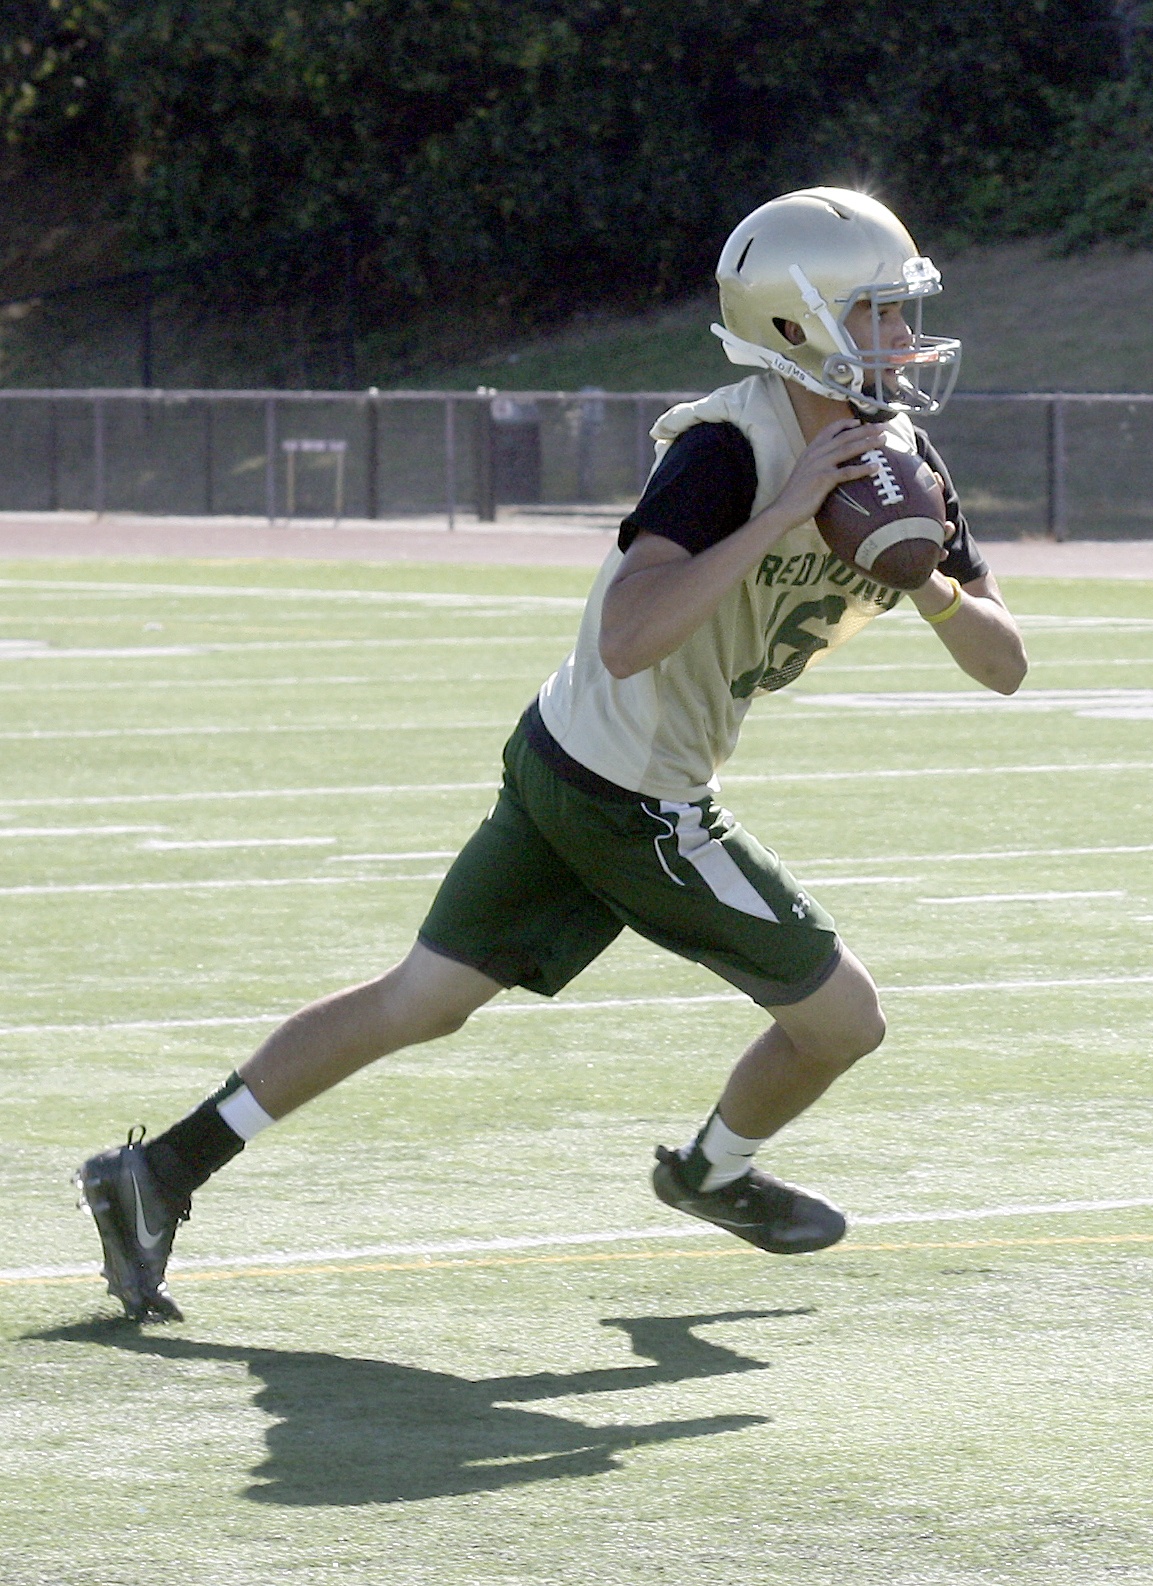 Redmond High junior starting quarterback Teryn Berry prepares to throw on Monday during practice. Andy Nystrom